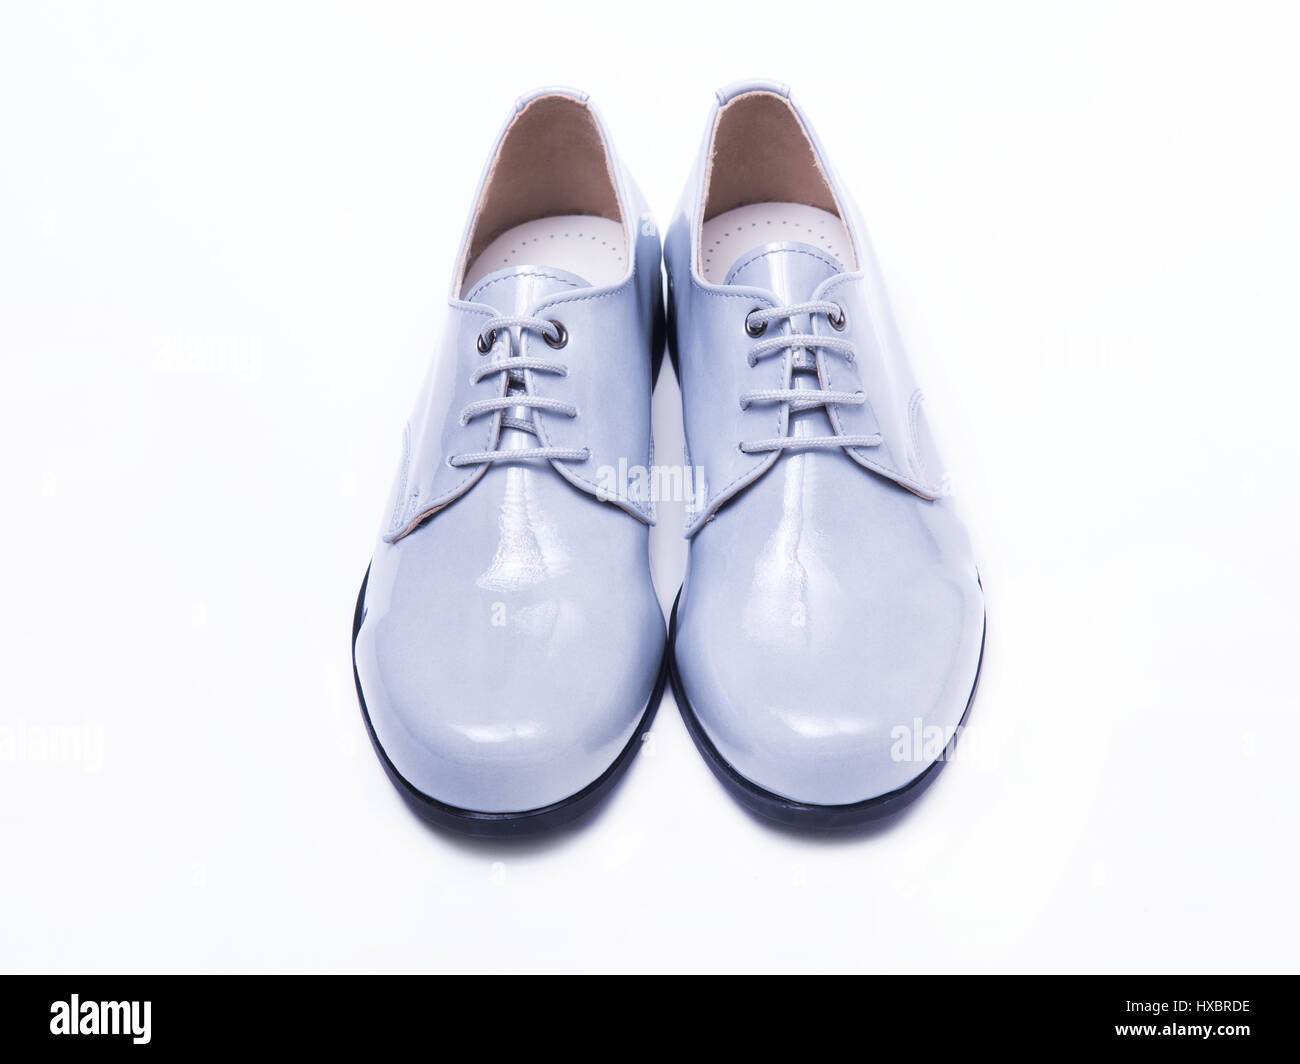 Gray lacquer shoes for a boy Stock Photo